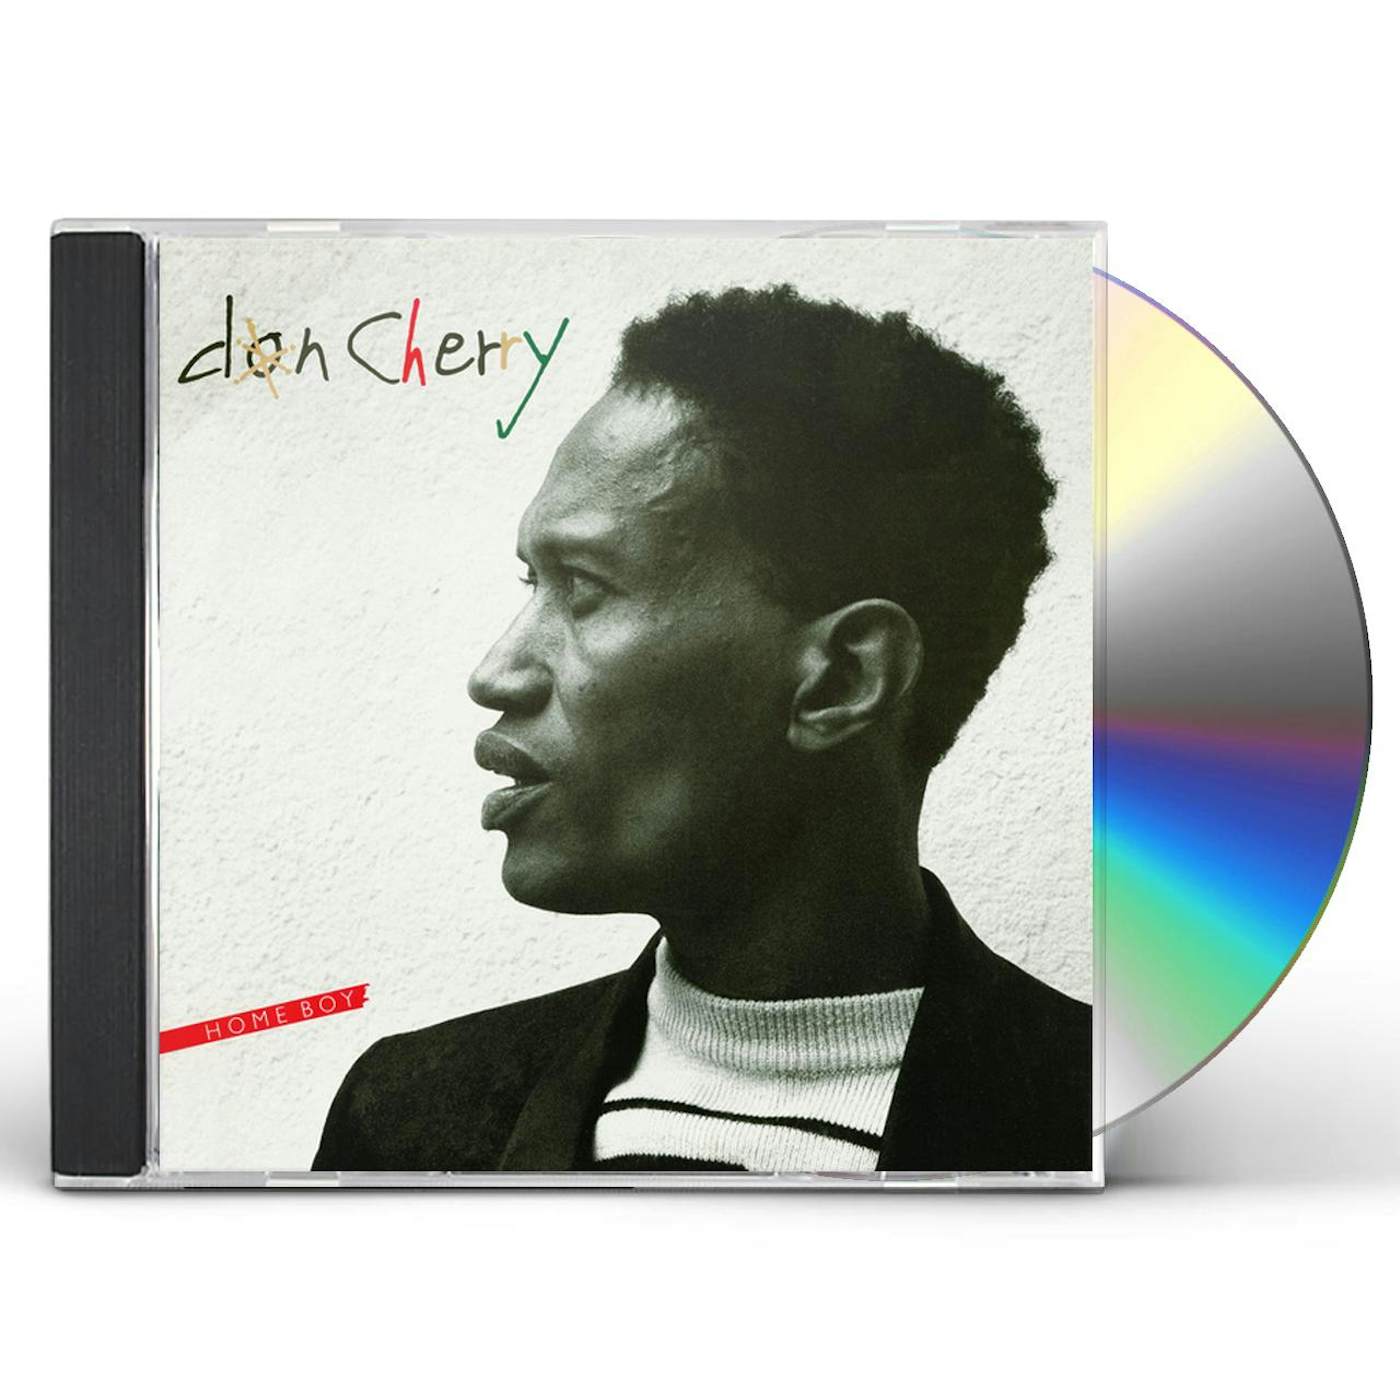 Don Cherry HOME BOY SISTER OUT CD